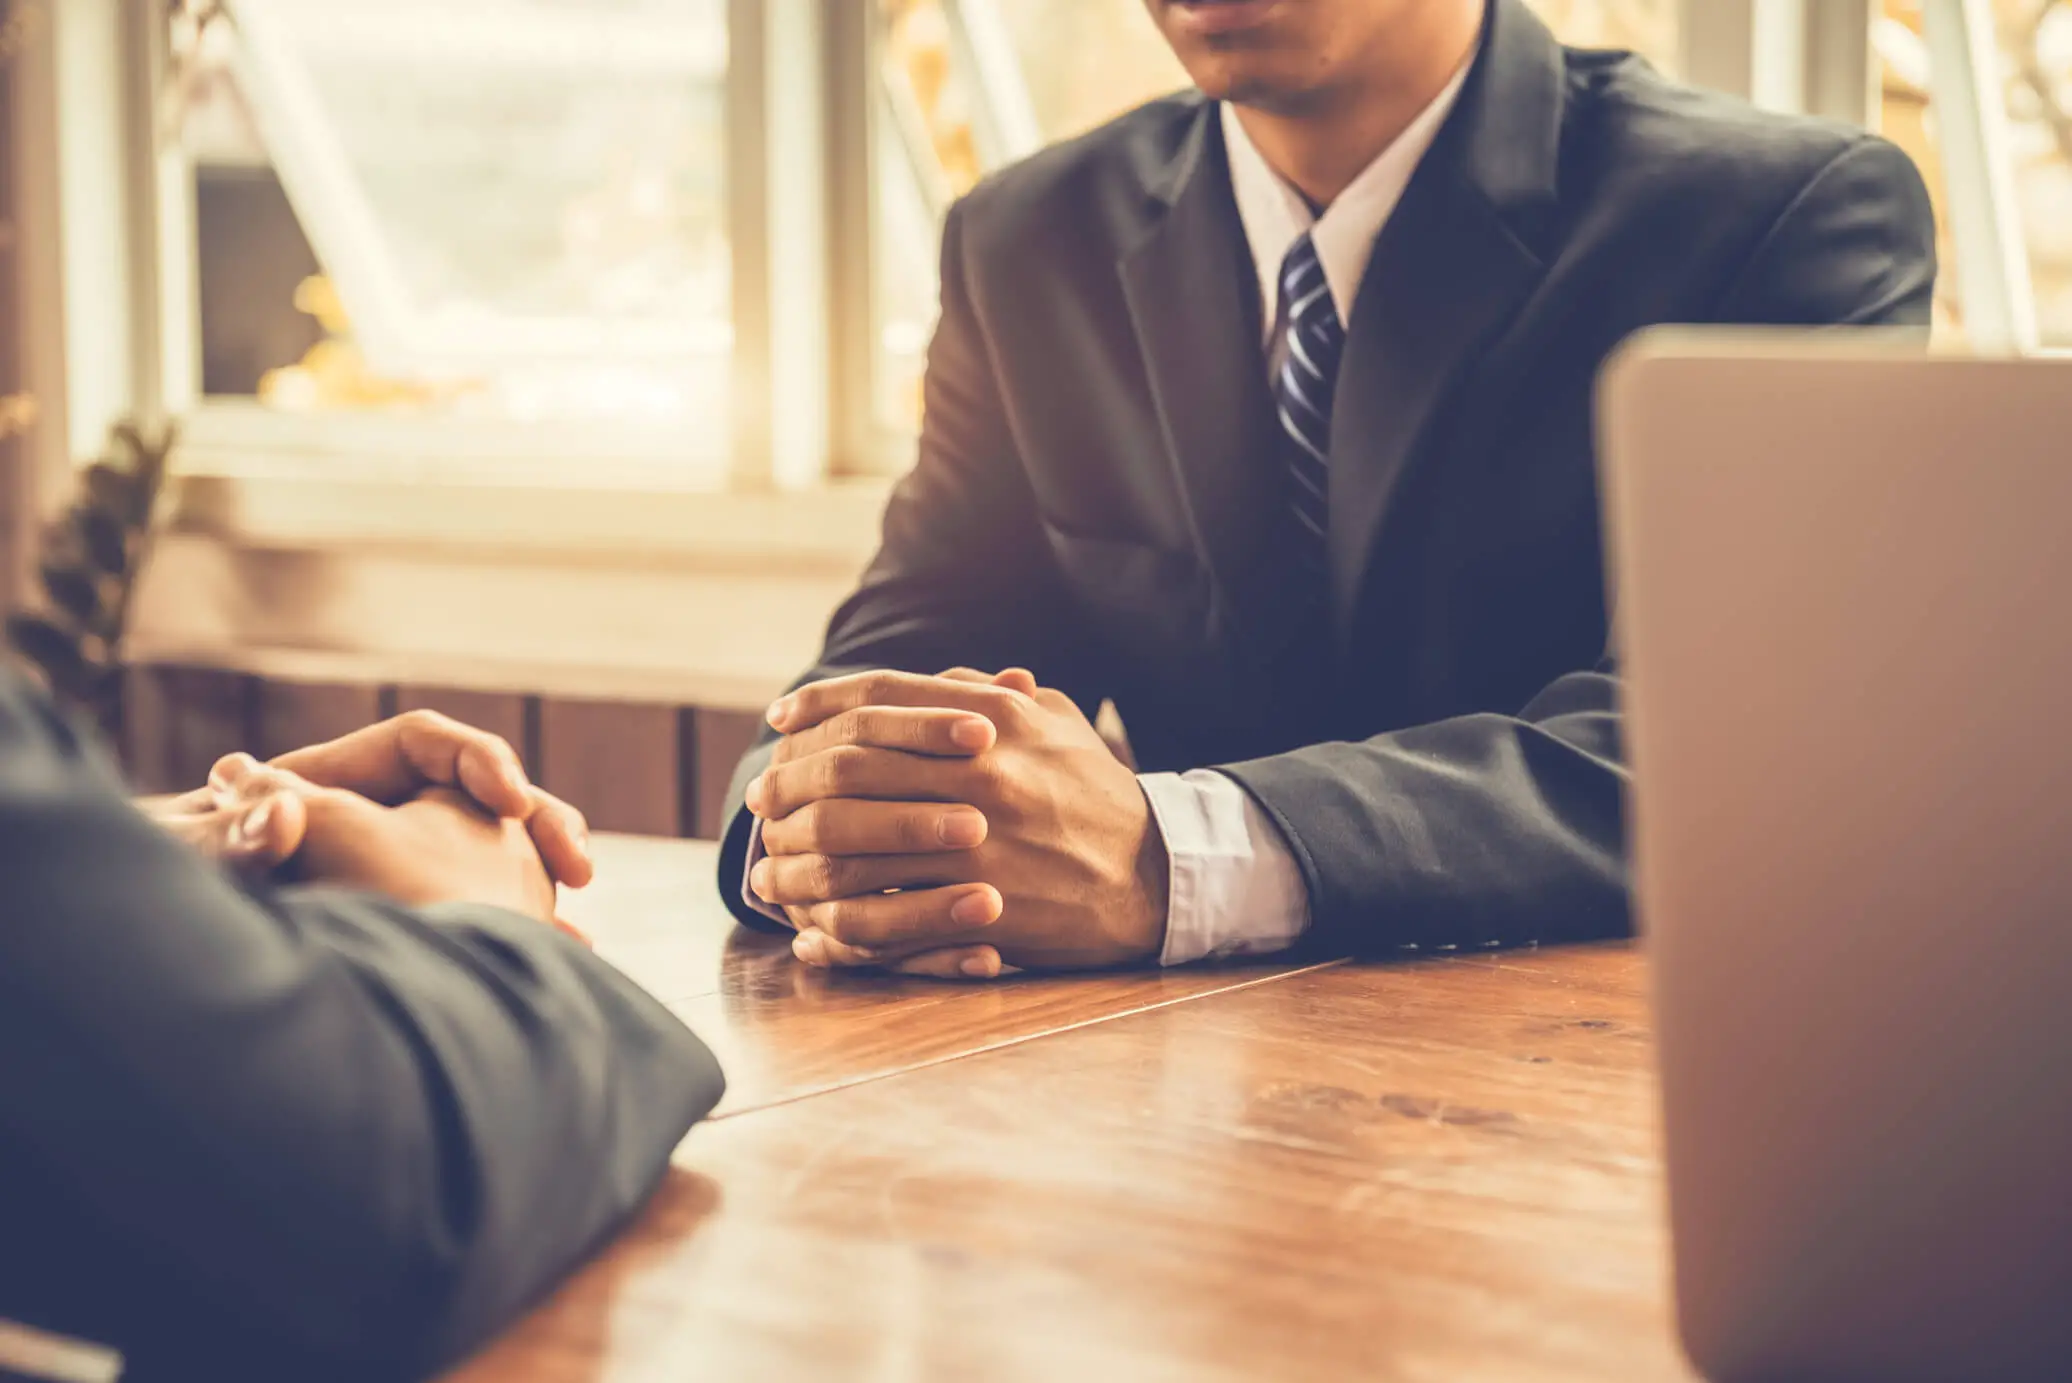 How to Negotiate Salary in an Interview